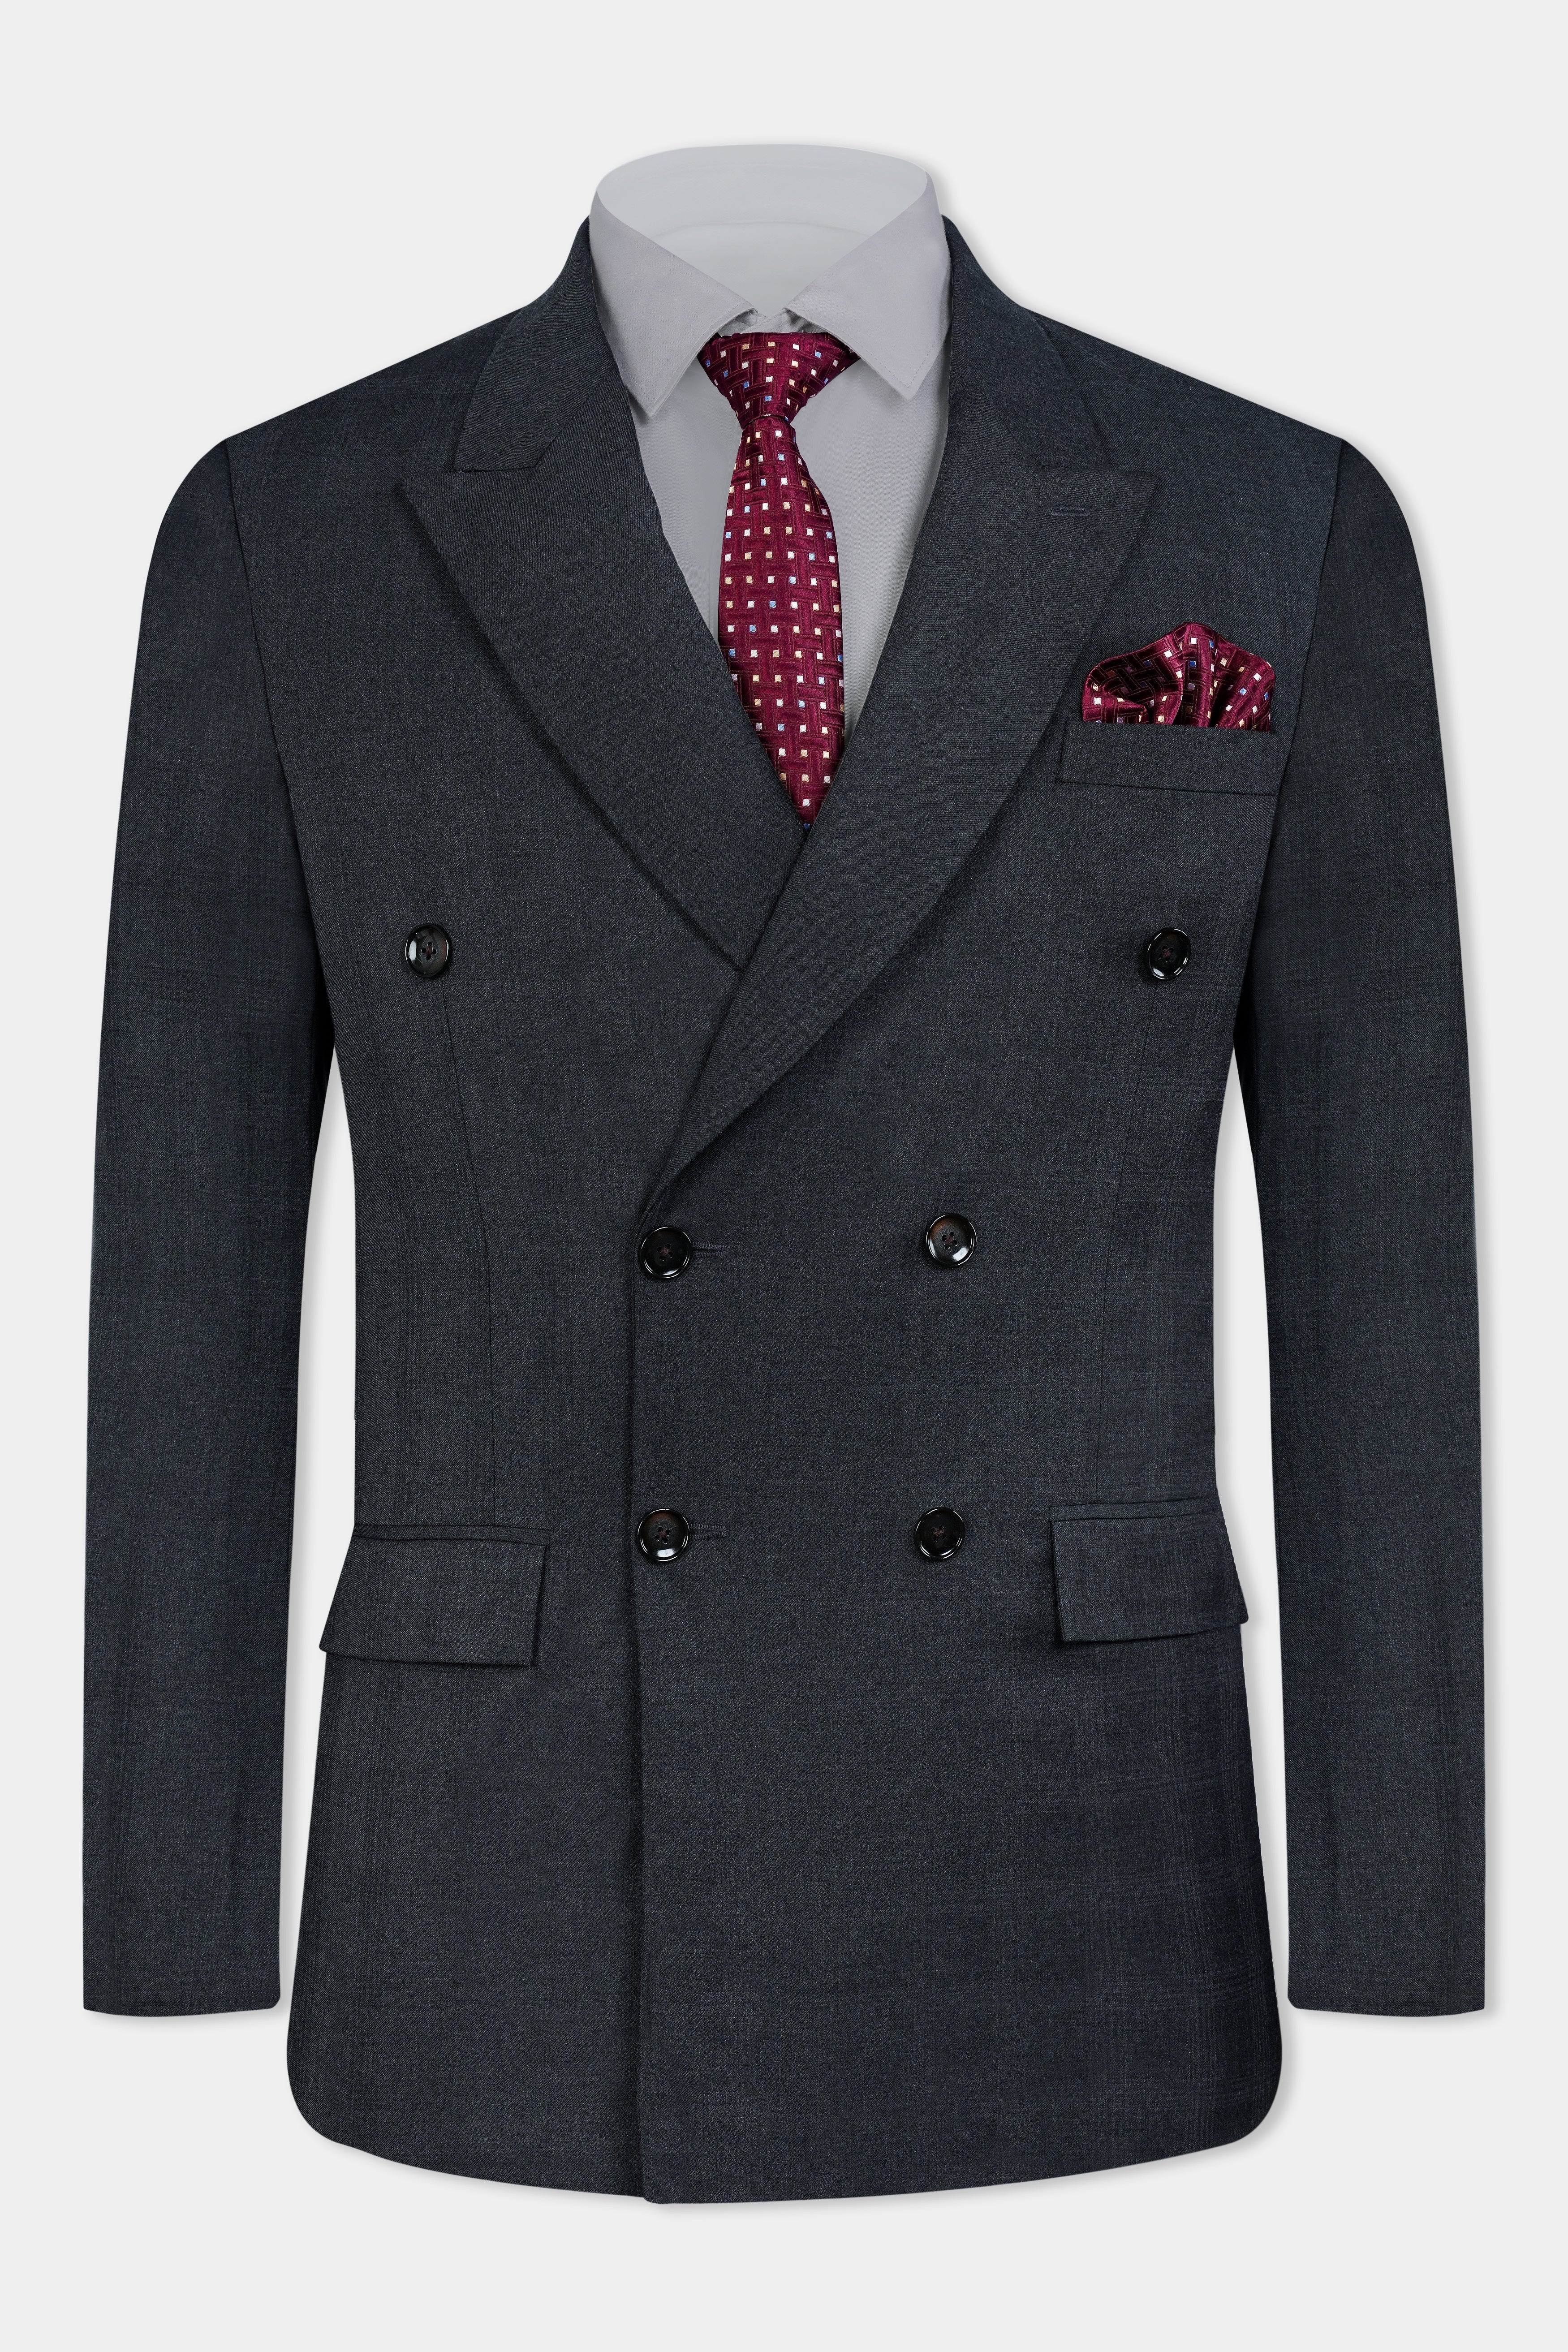 Thunder Gray Checkered Wool Rich Double Breasted Blazer BL3093-DB-36, BL3093-DB-38, BL3093-DB-40, BL3093-DB-42, BL3093-DB-44, BL3093-DB-46, BL3093-DB-48, BL3093-DB-50, BL3093-DB-52, BL3093-DB-54, BL3093-DB-56, BL3093-DB-58, BL3093-DB-60